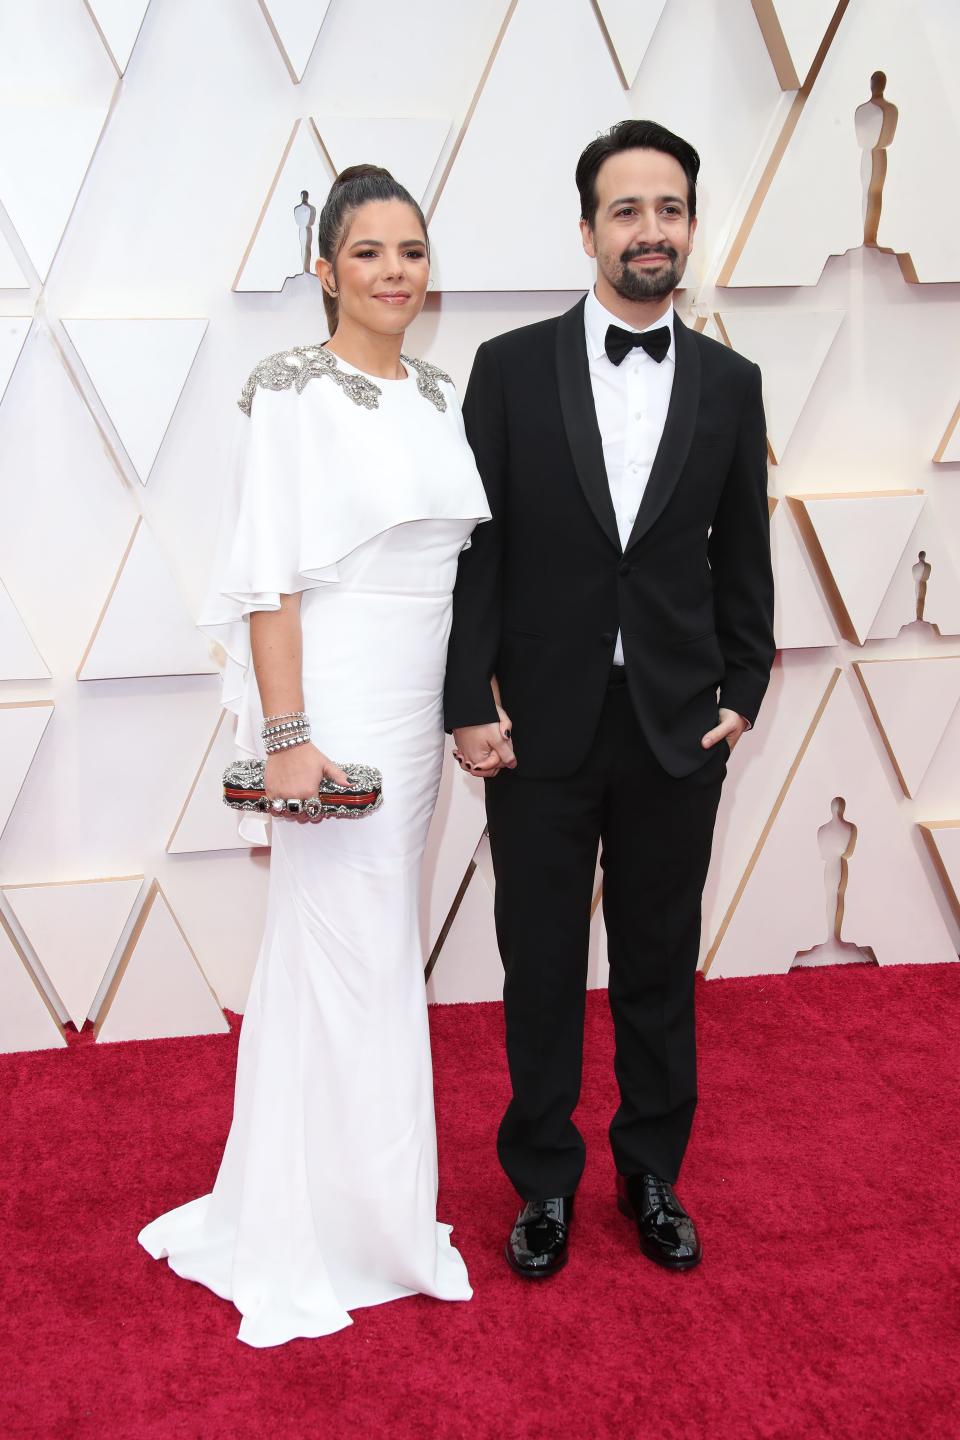 Vanessa Nadal and Lin-Manuel Miranda, seen here at the 92nd Academy Awards, have spent much of their quarantine getting their son through virtual kindergarten.